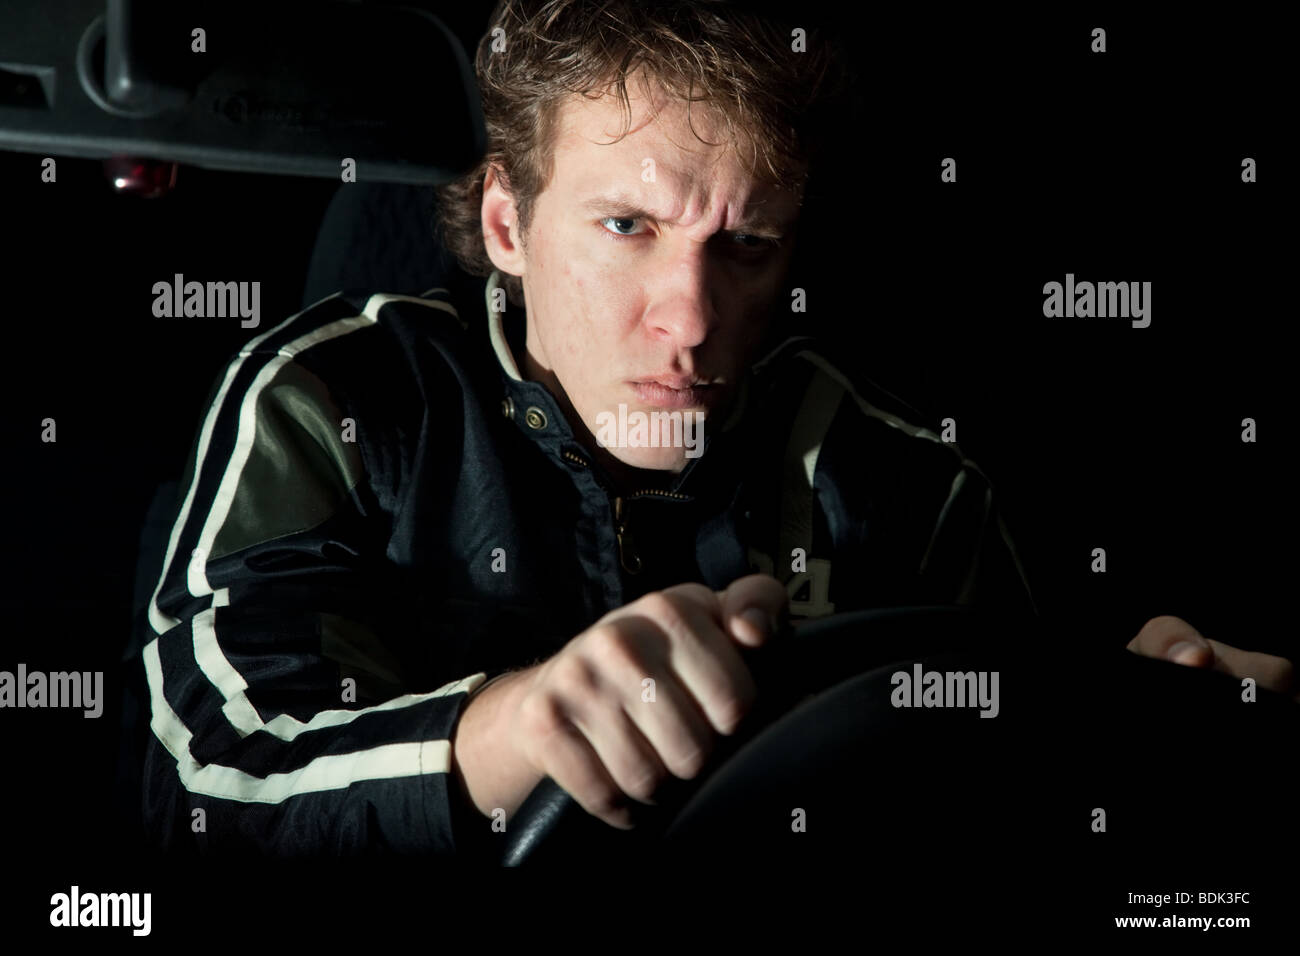 Aggressive and angry driver driving a car Stock Photo